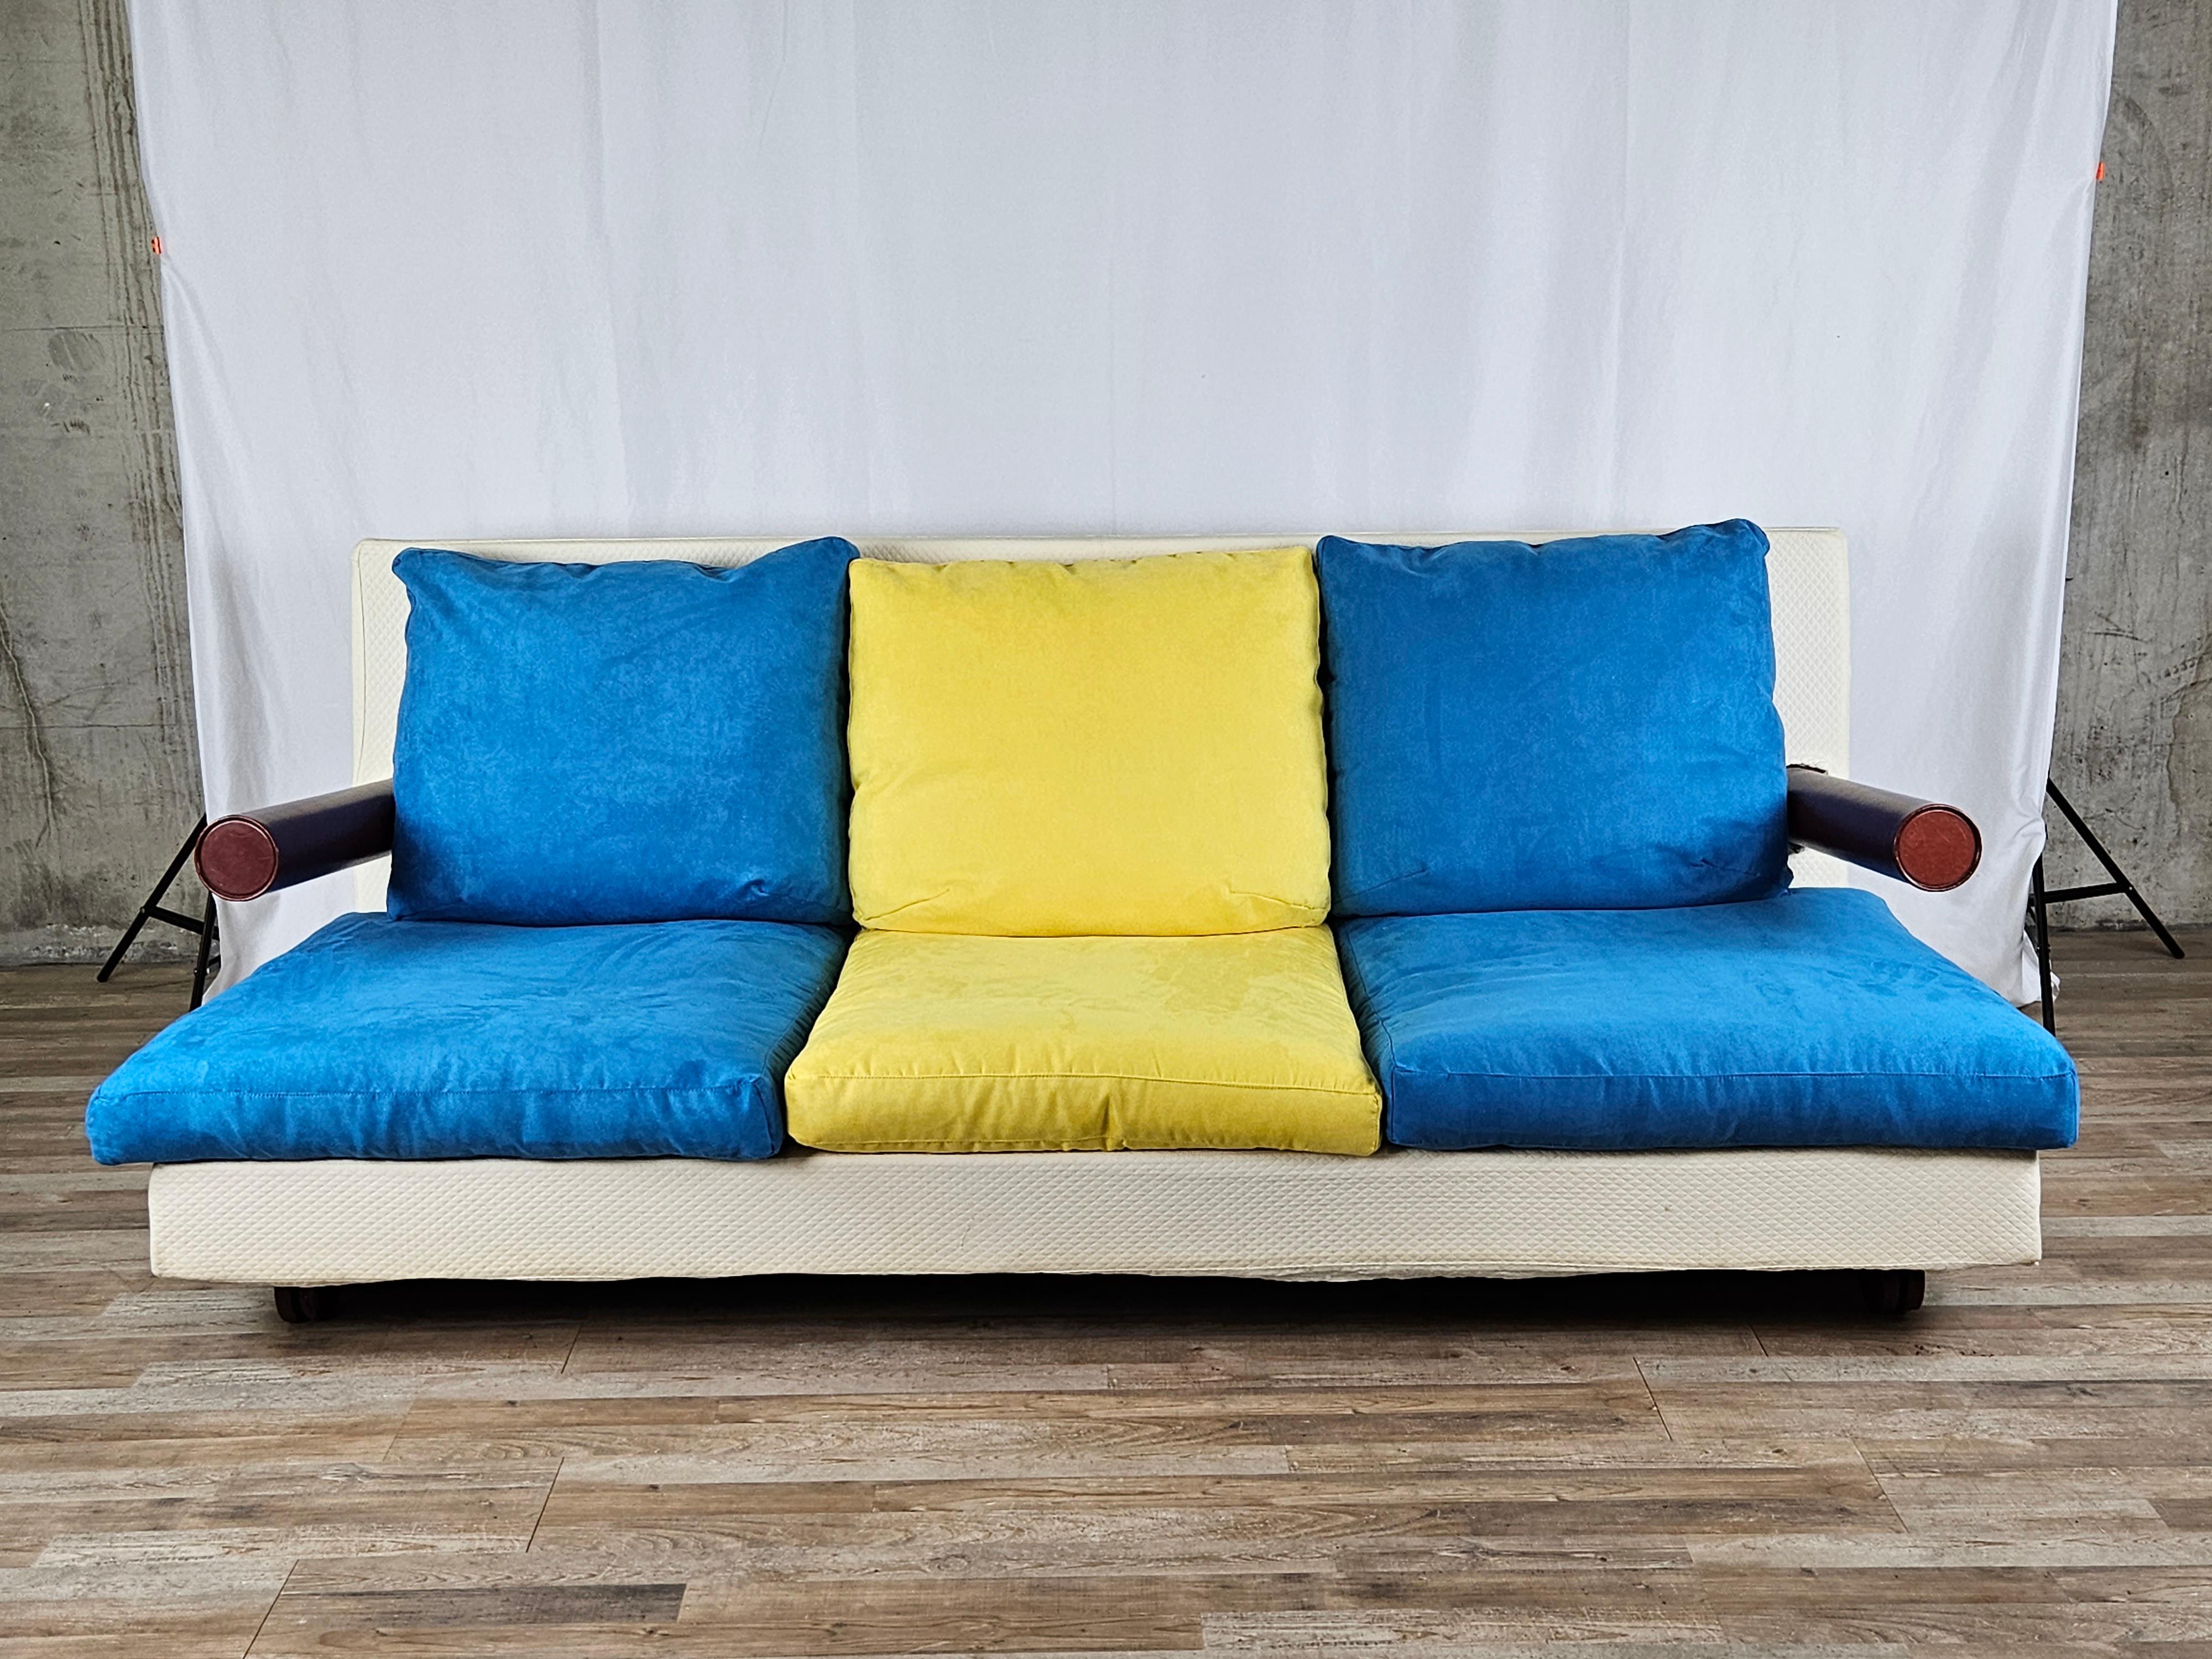 Italian design sofa, produced by B&B Italia to a design by Antonio Citterio circa 1986.

Modern and attractive piece of furniture, designed to be placed in any kind of Environment from modern to antique.

The cream upholstery of the sofa is its